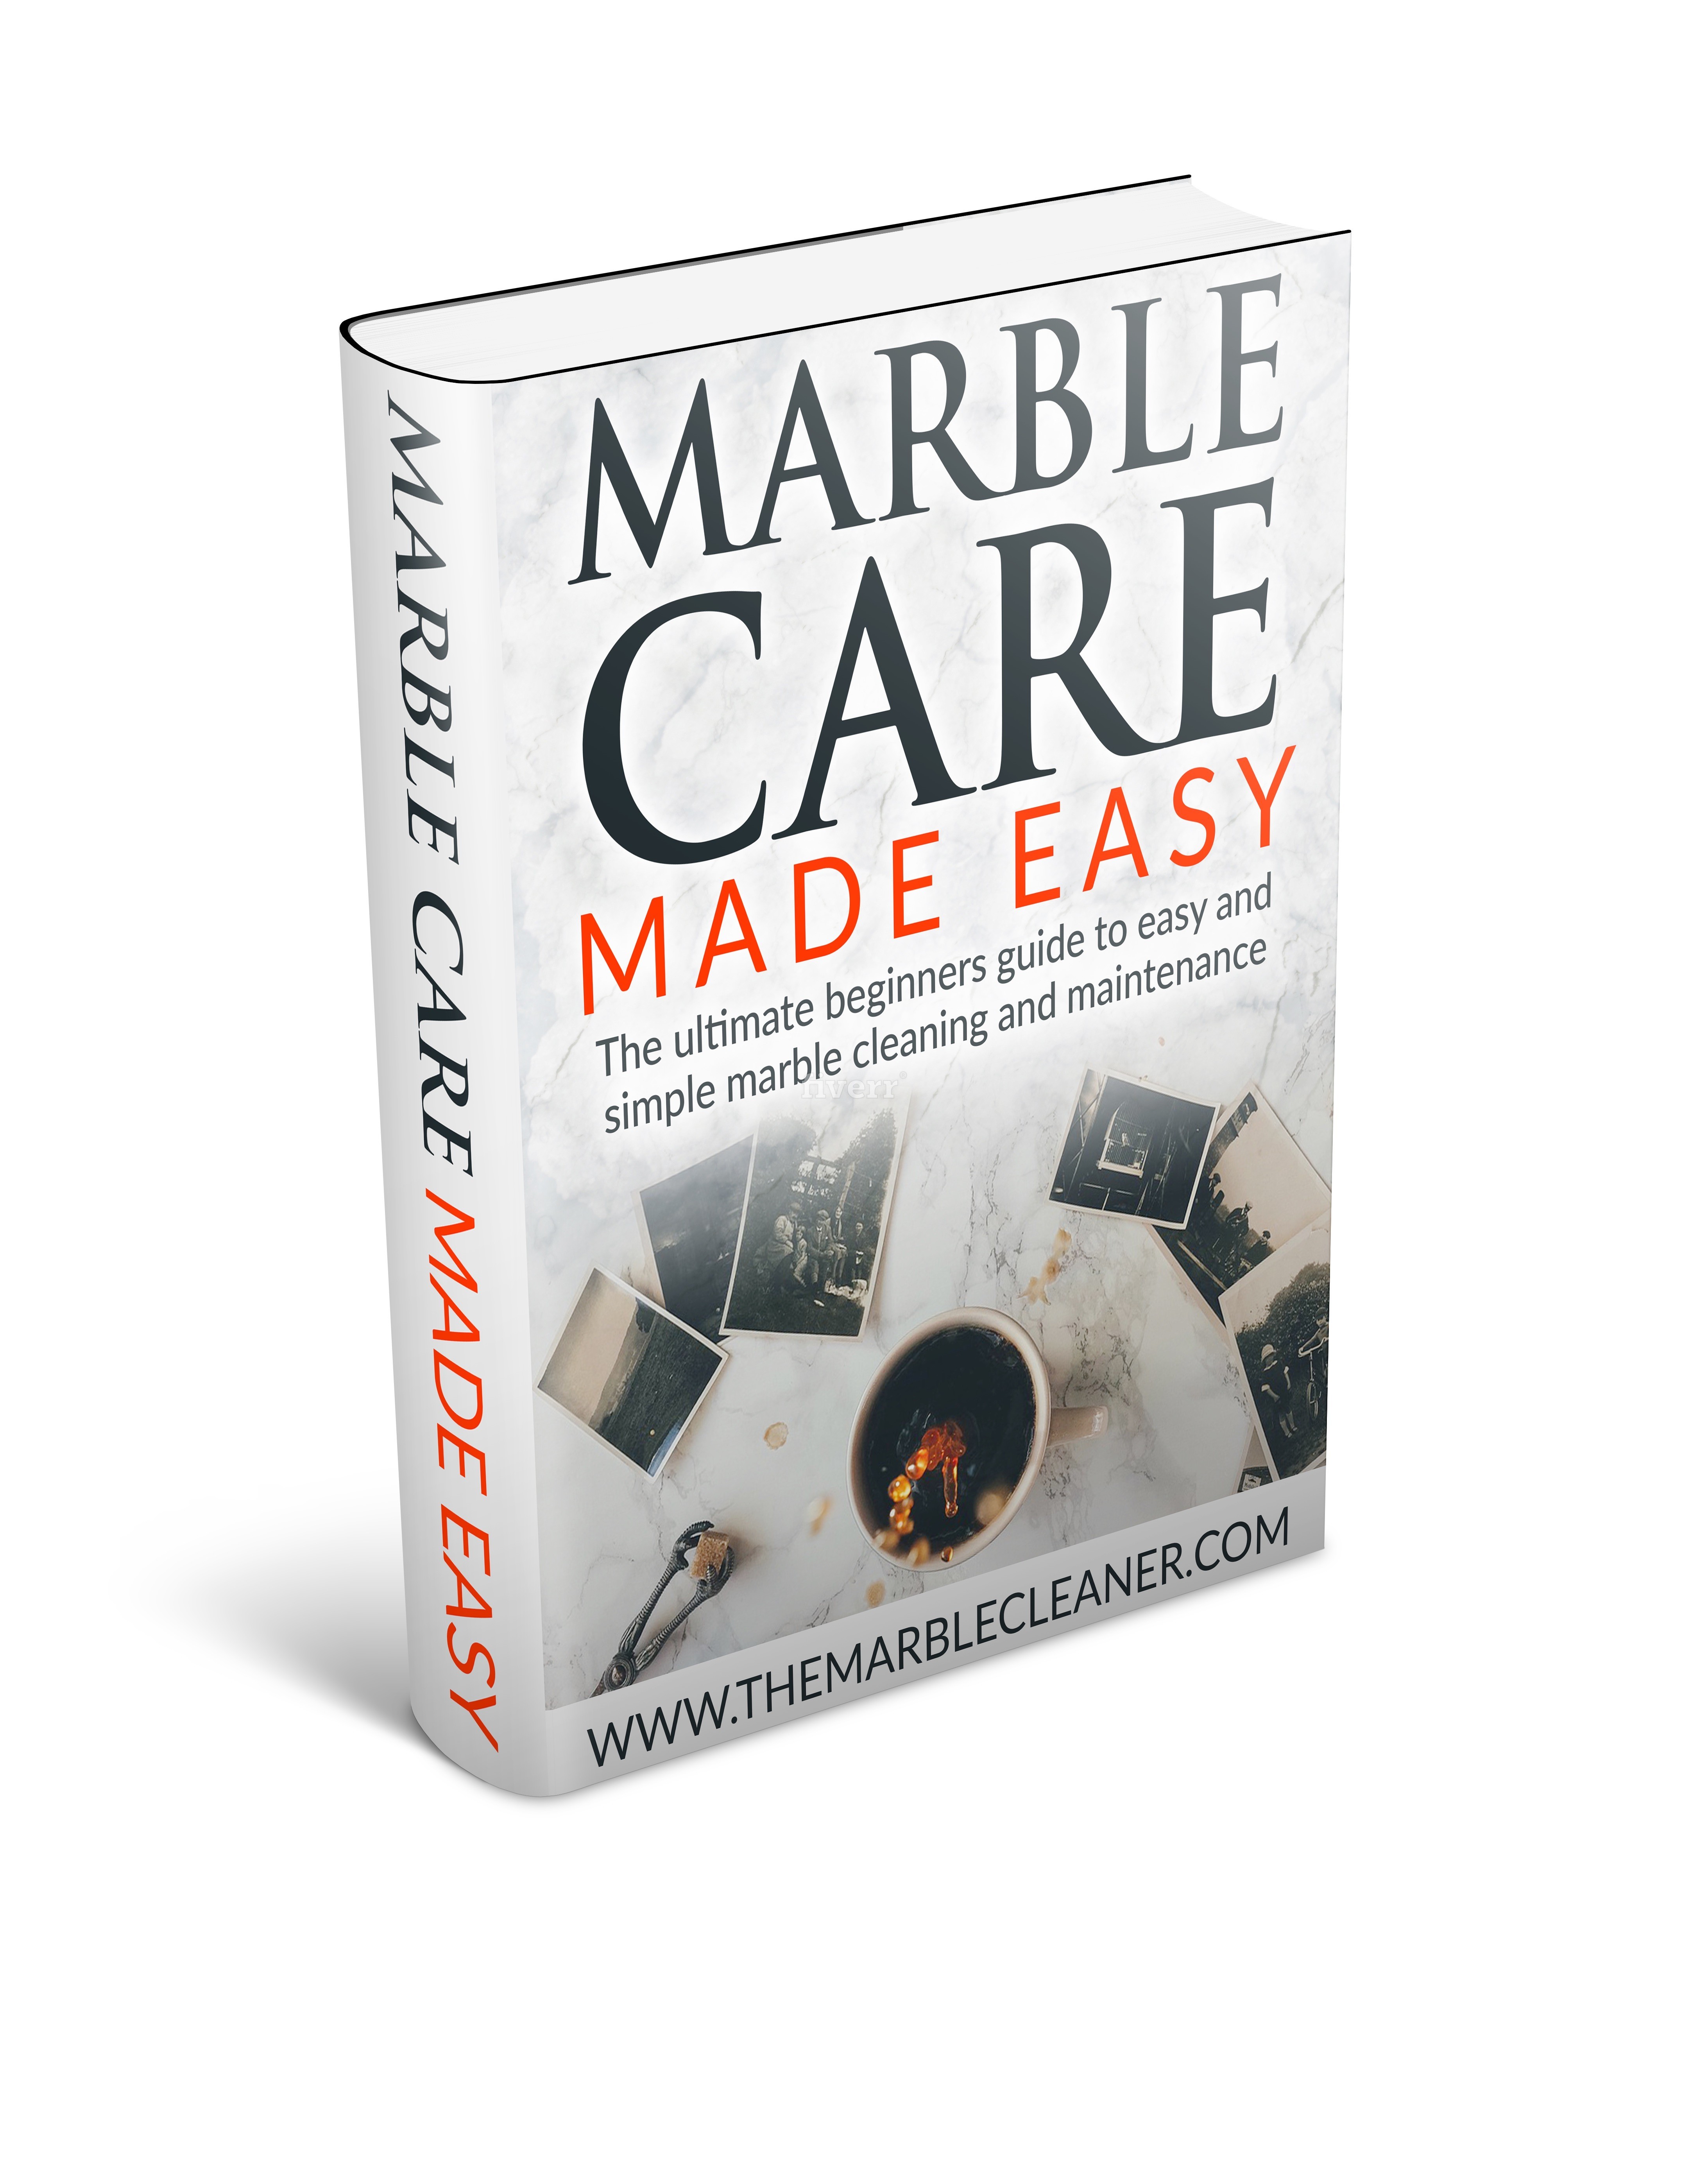 3D marble care made easy